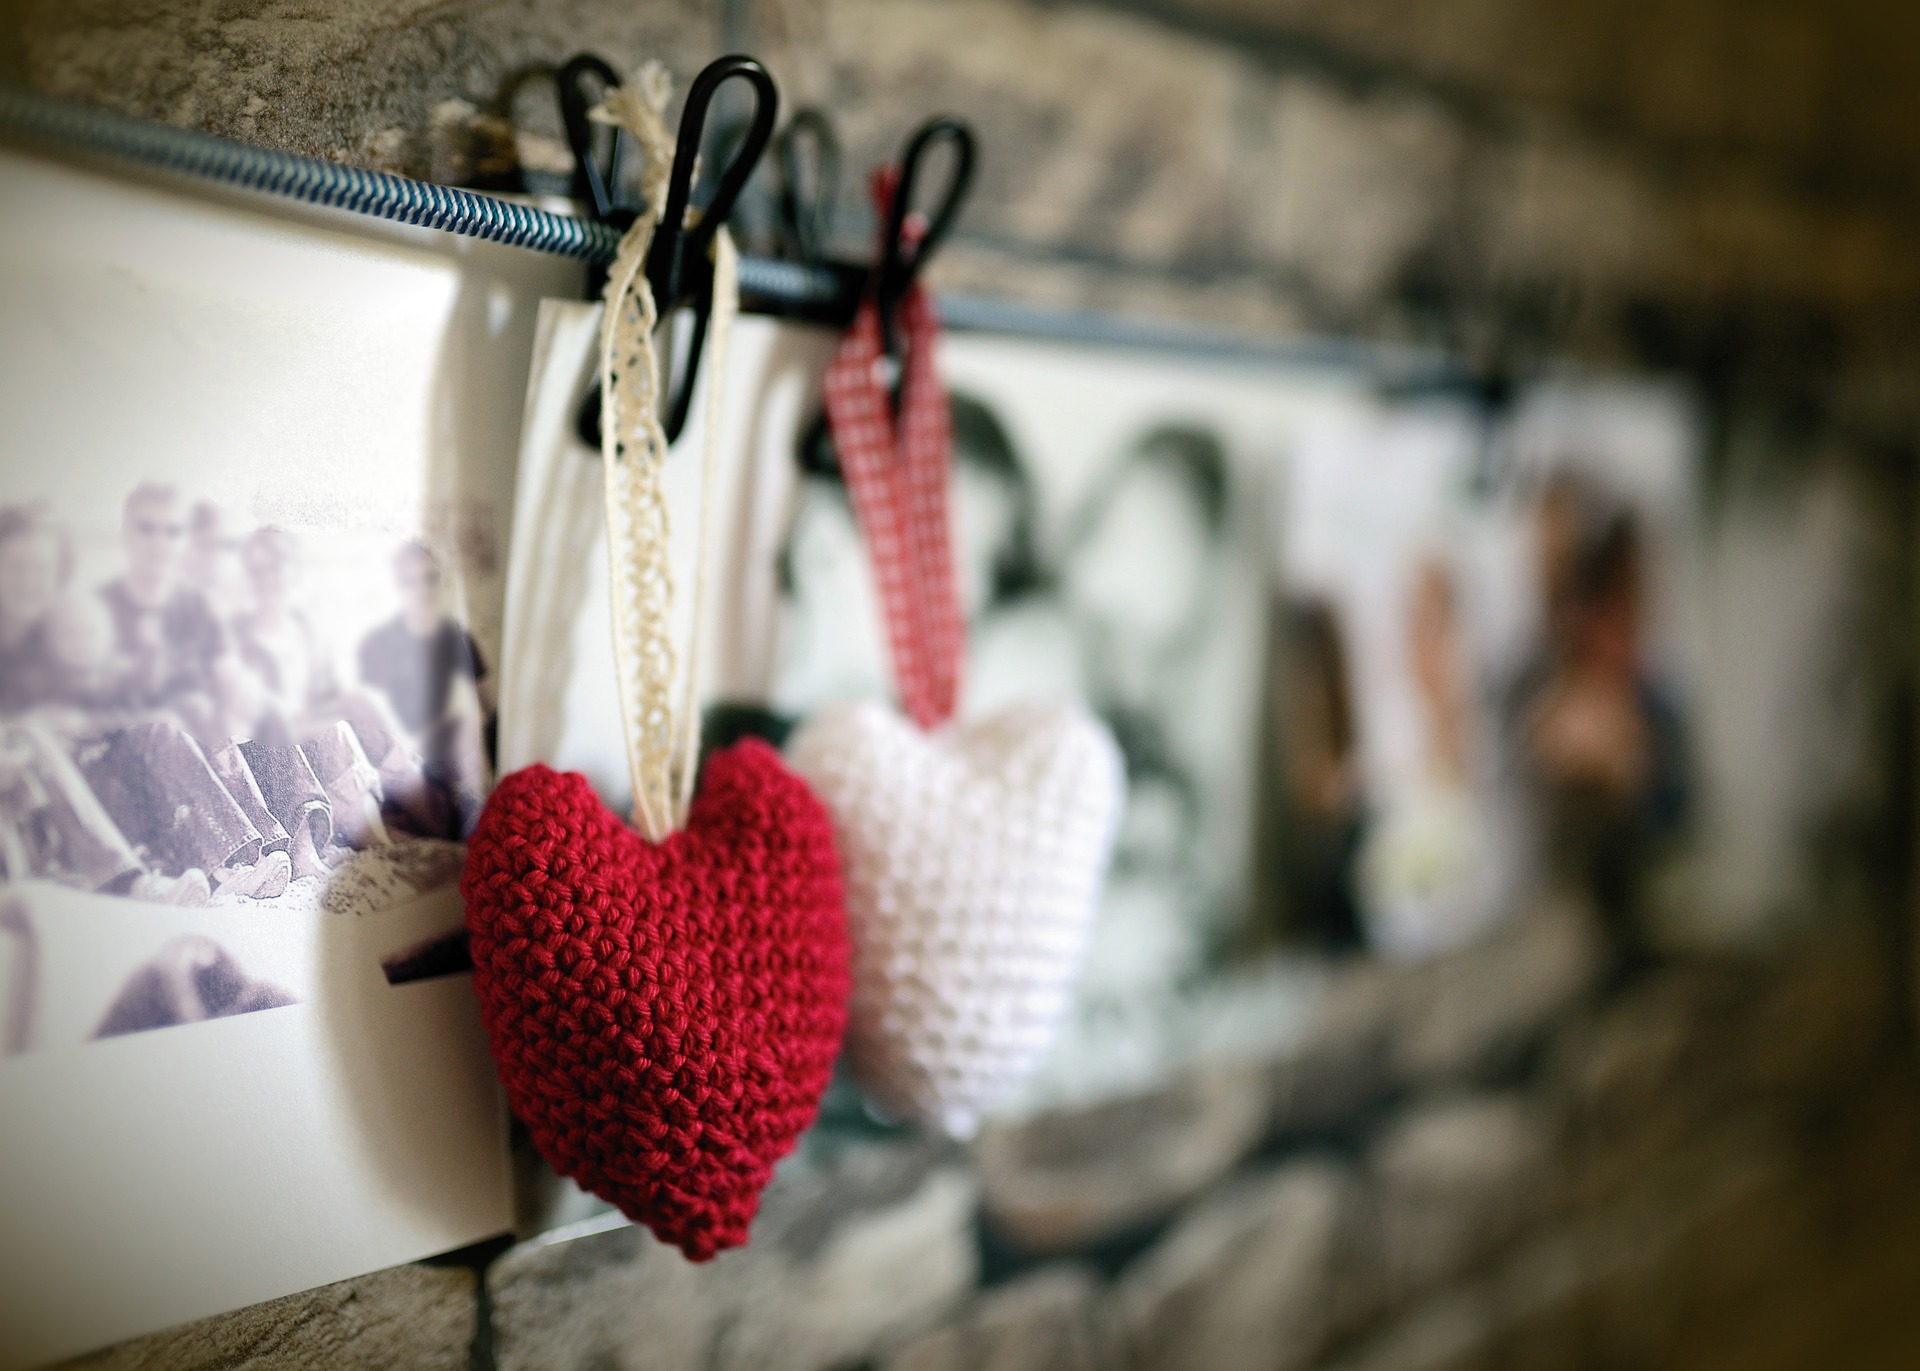 A Photo Wall For Storing Memories